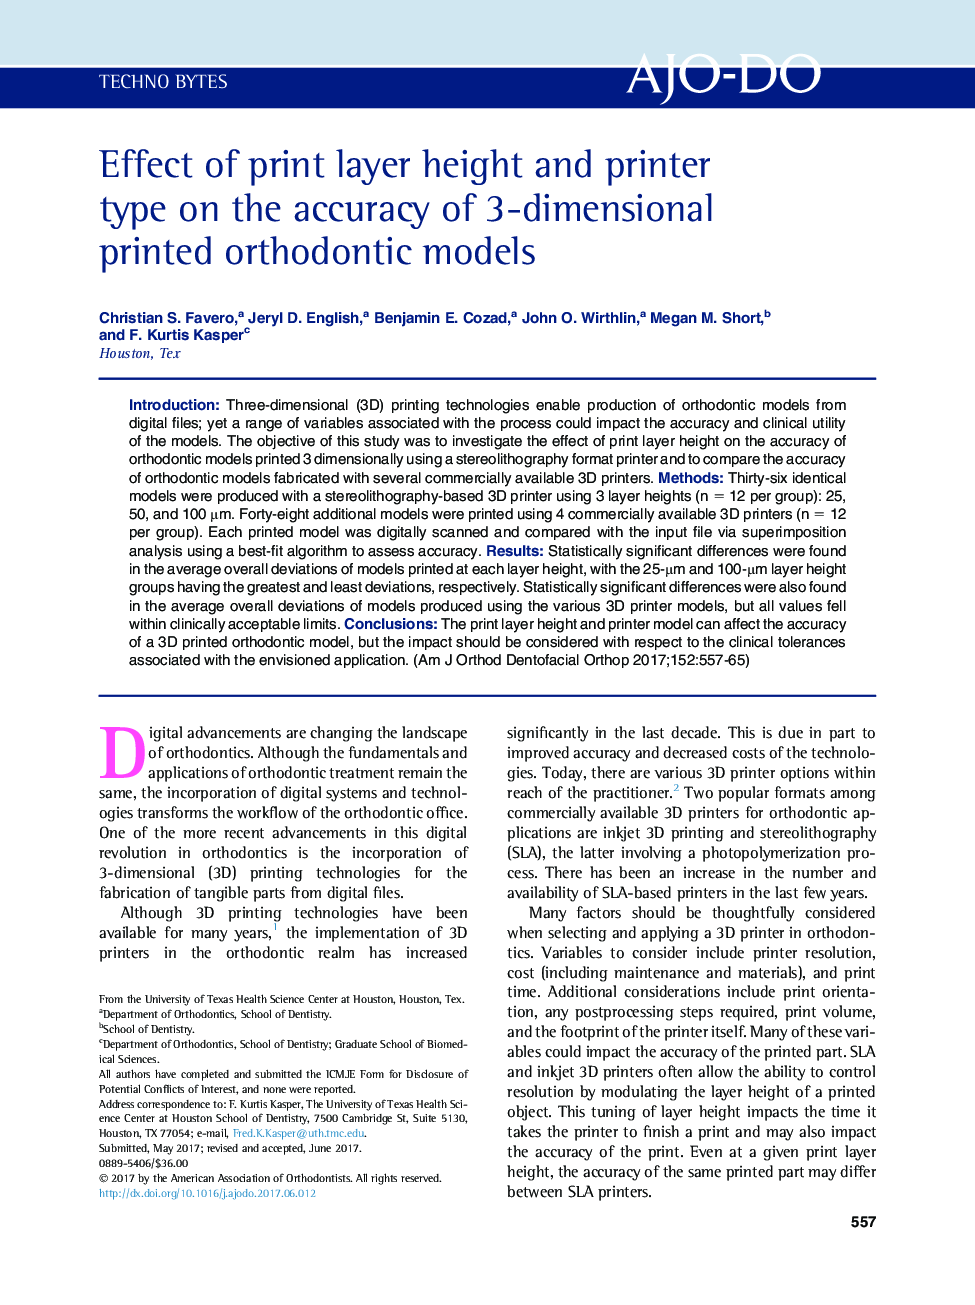 Effect of print layer height and printer type on the accuracy of 3-dimensional printed orthodontic models